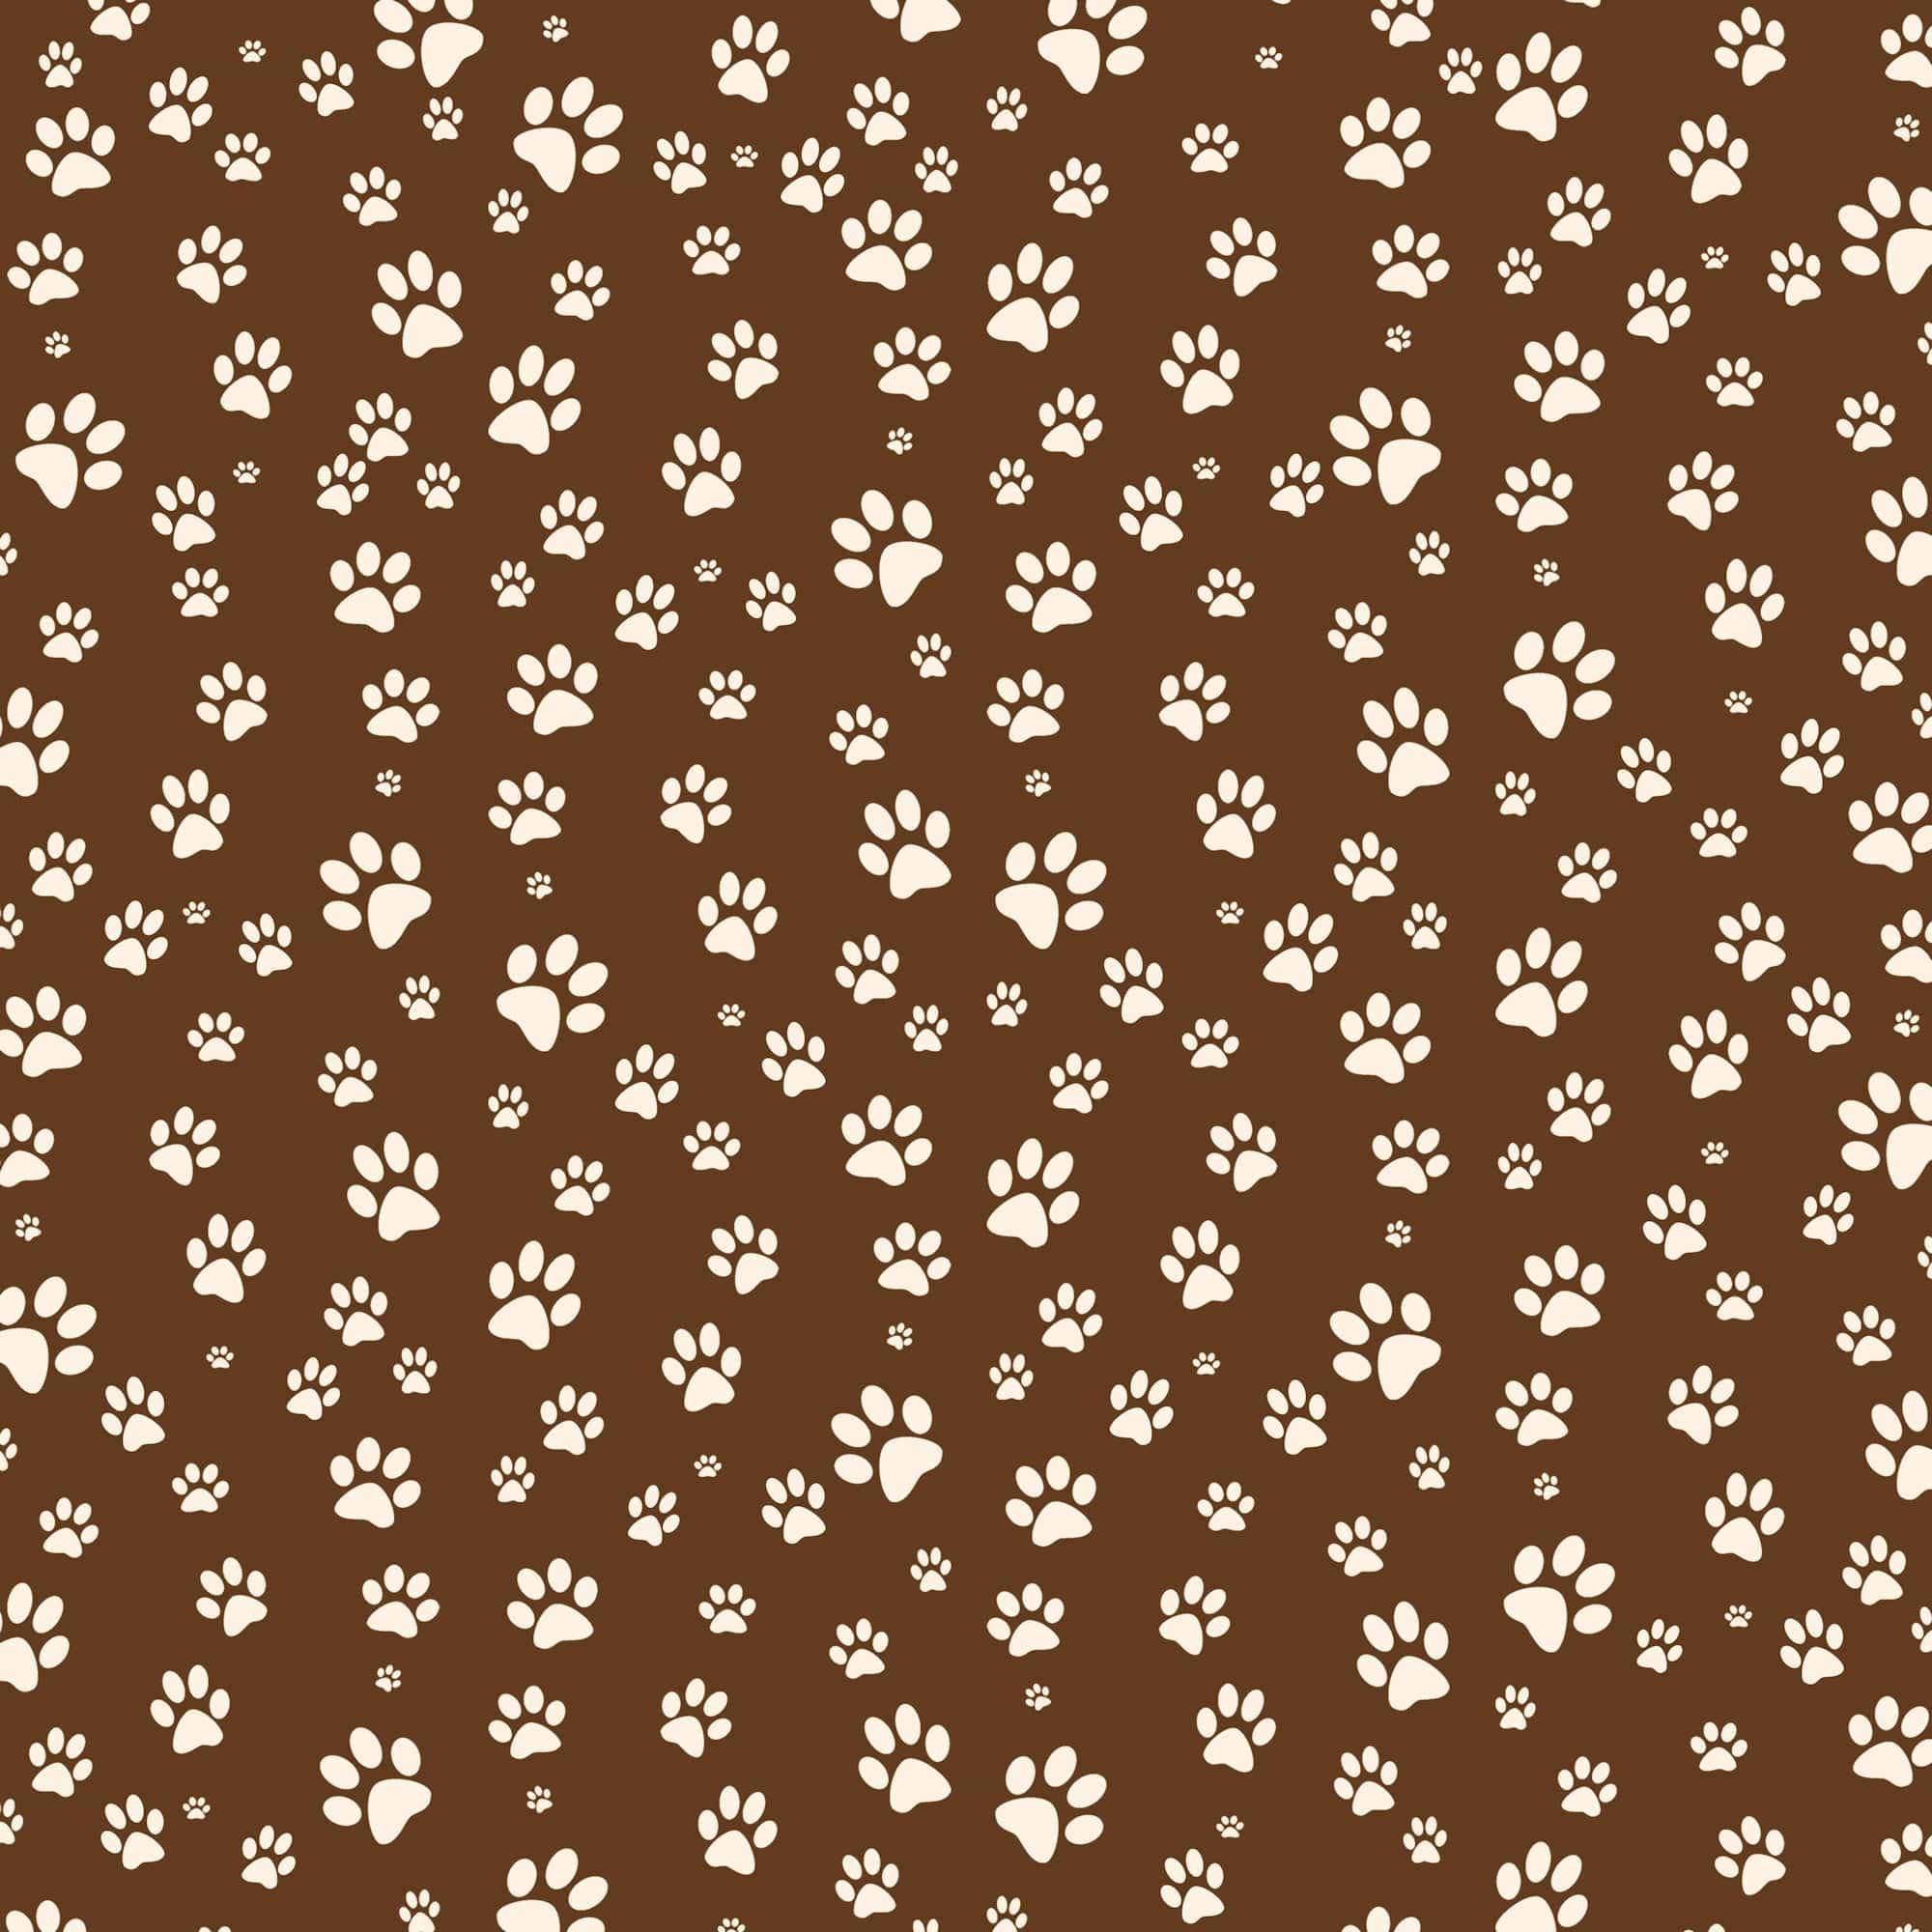 Puppy Love Collection Love My Dog 12 x 12 Double-Sided Scrapbook Paper by SSC Designs - Scrapbook Supply Companies